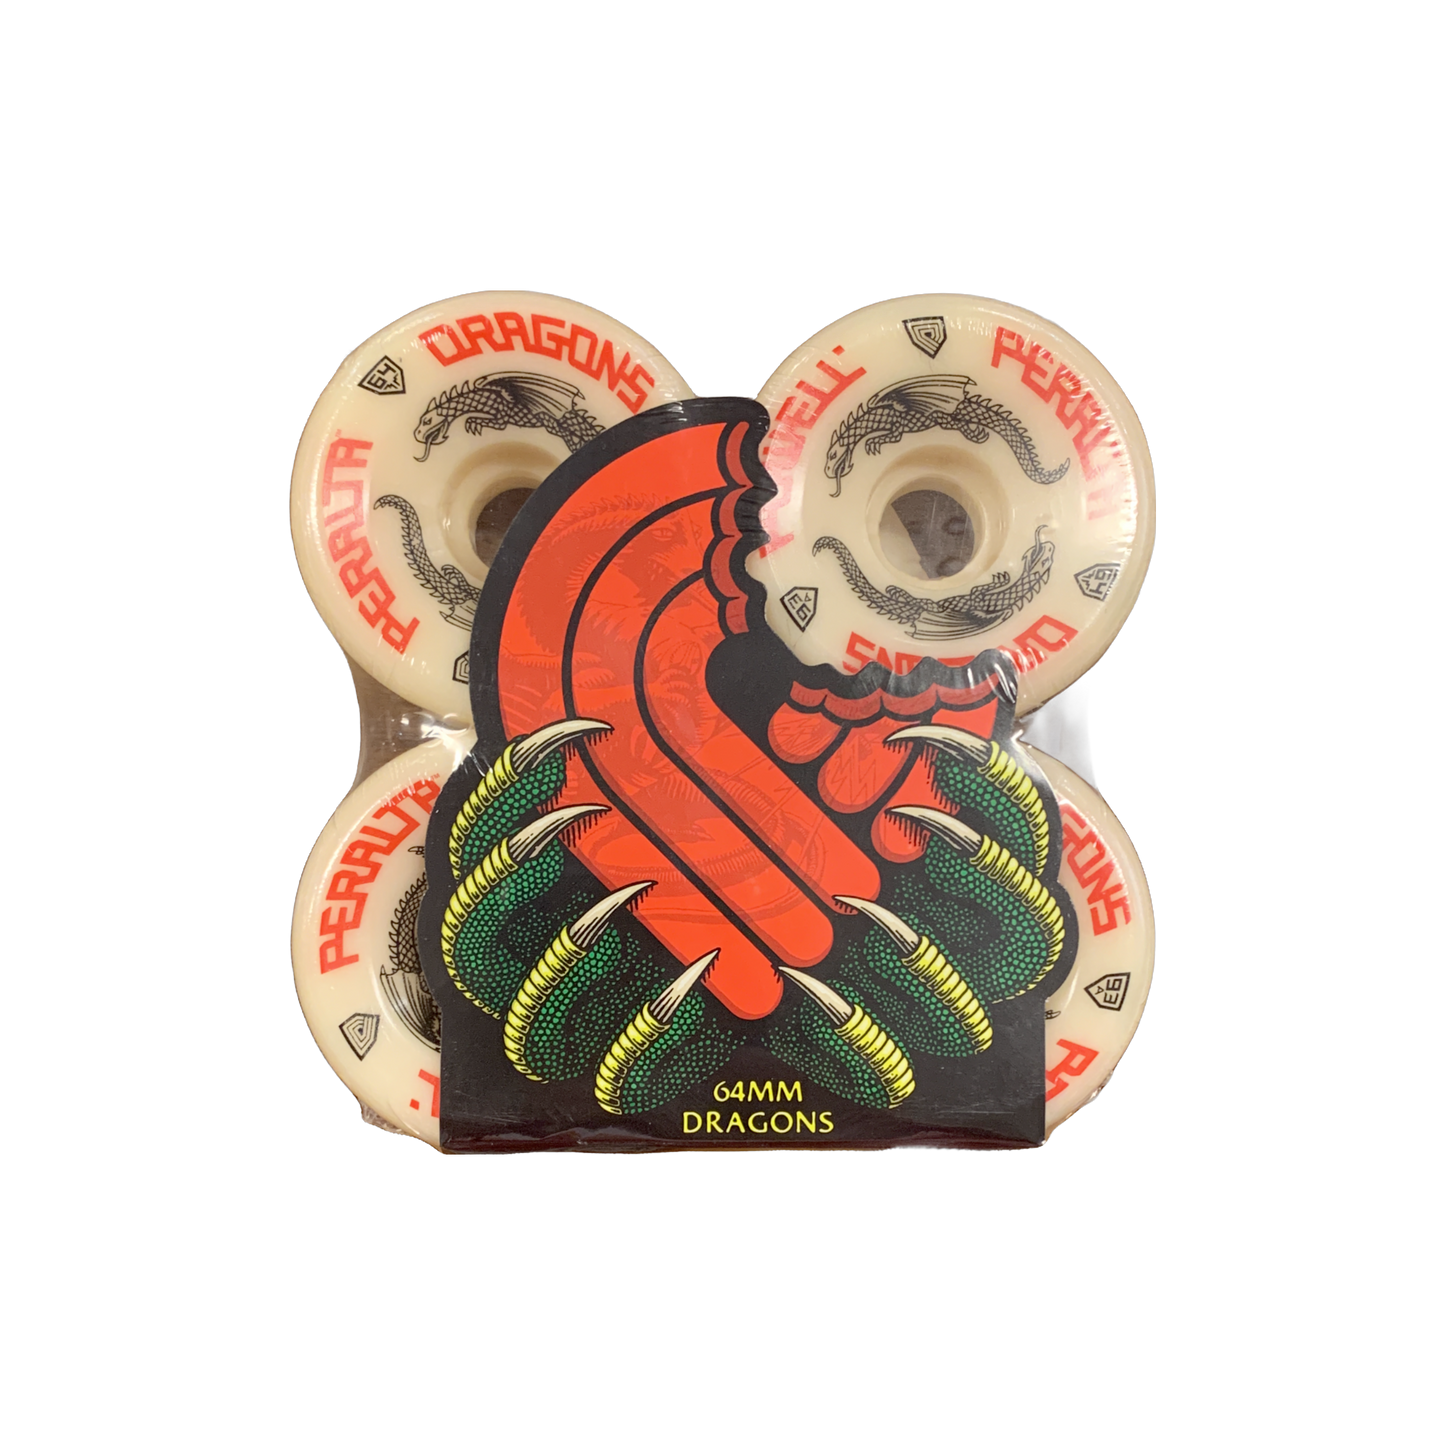 Powell Peralta - Dragon Formula 64mm x 36mm 93A Off White